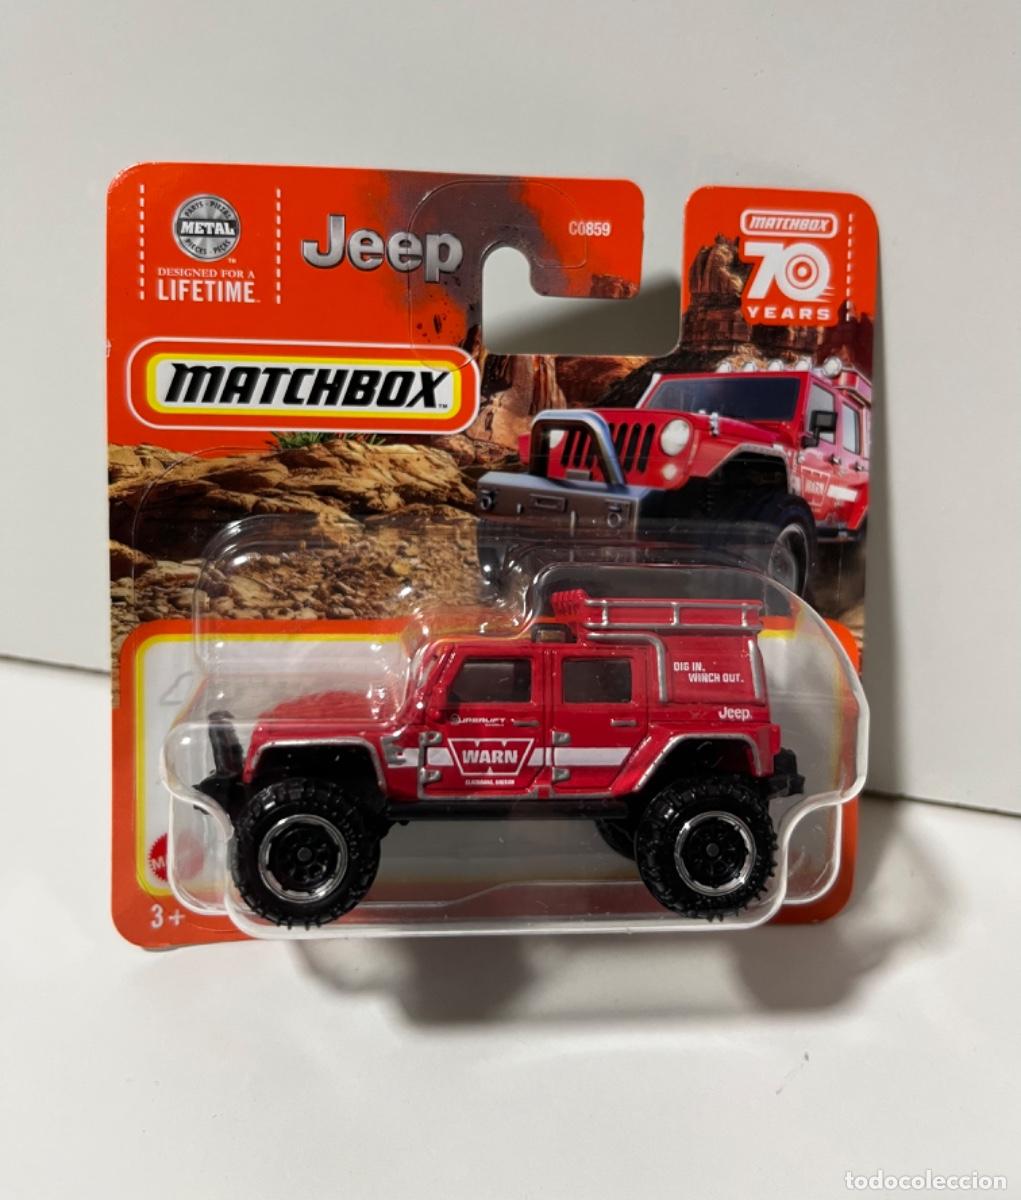 matchbox jeep wrangler (1) - Buy Model cars at other scales on todocoleccion